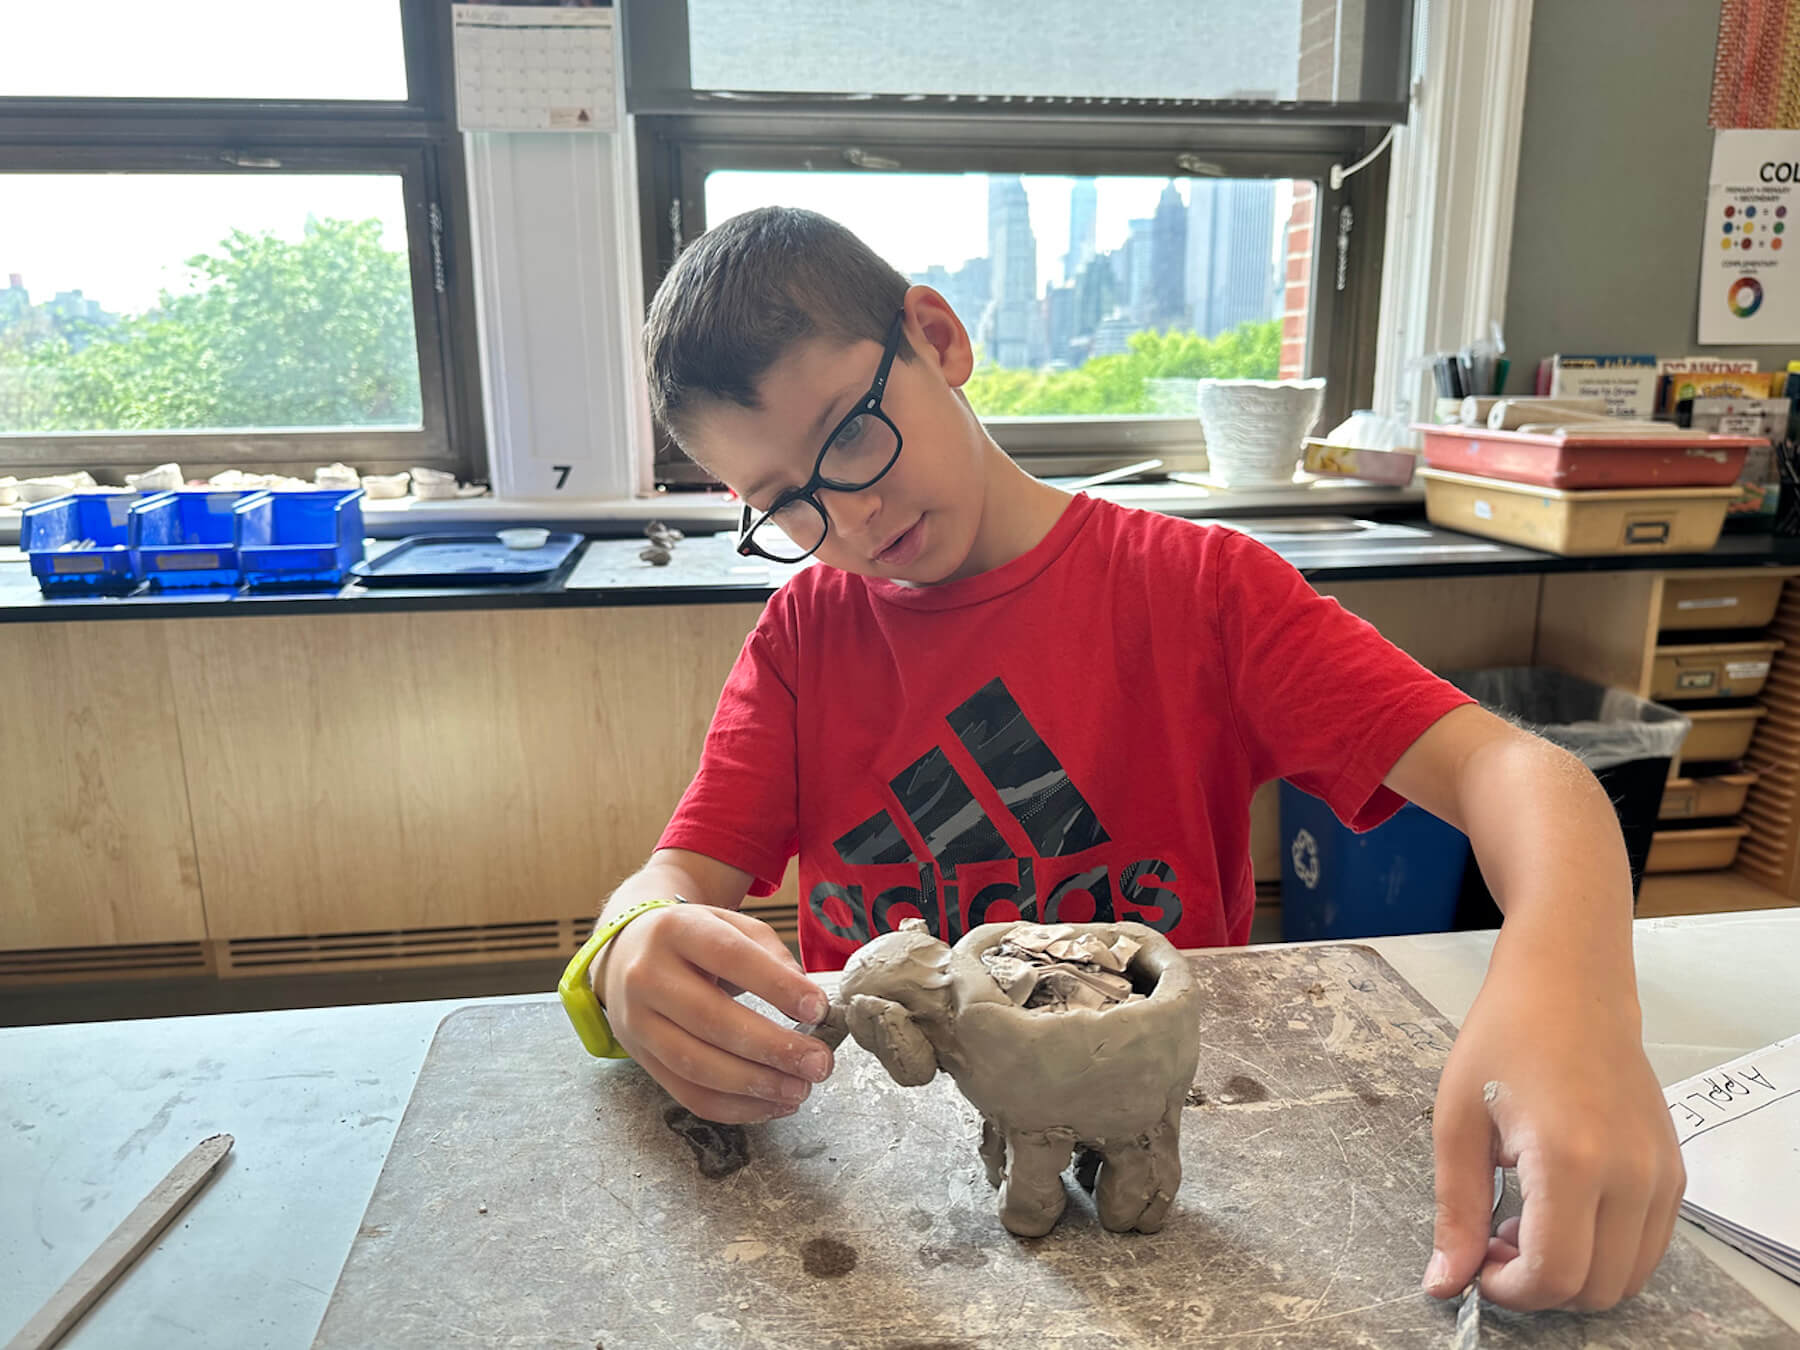 Ethical Culture student observes his clay creation in the art classroom.